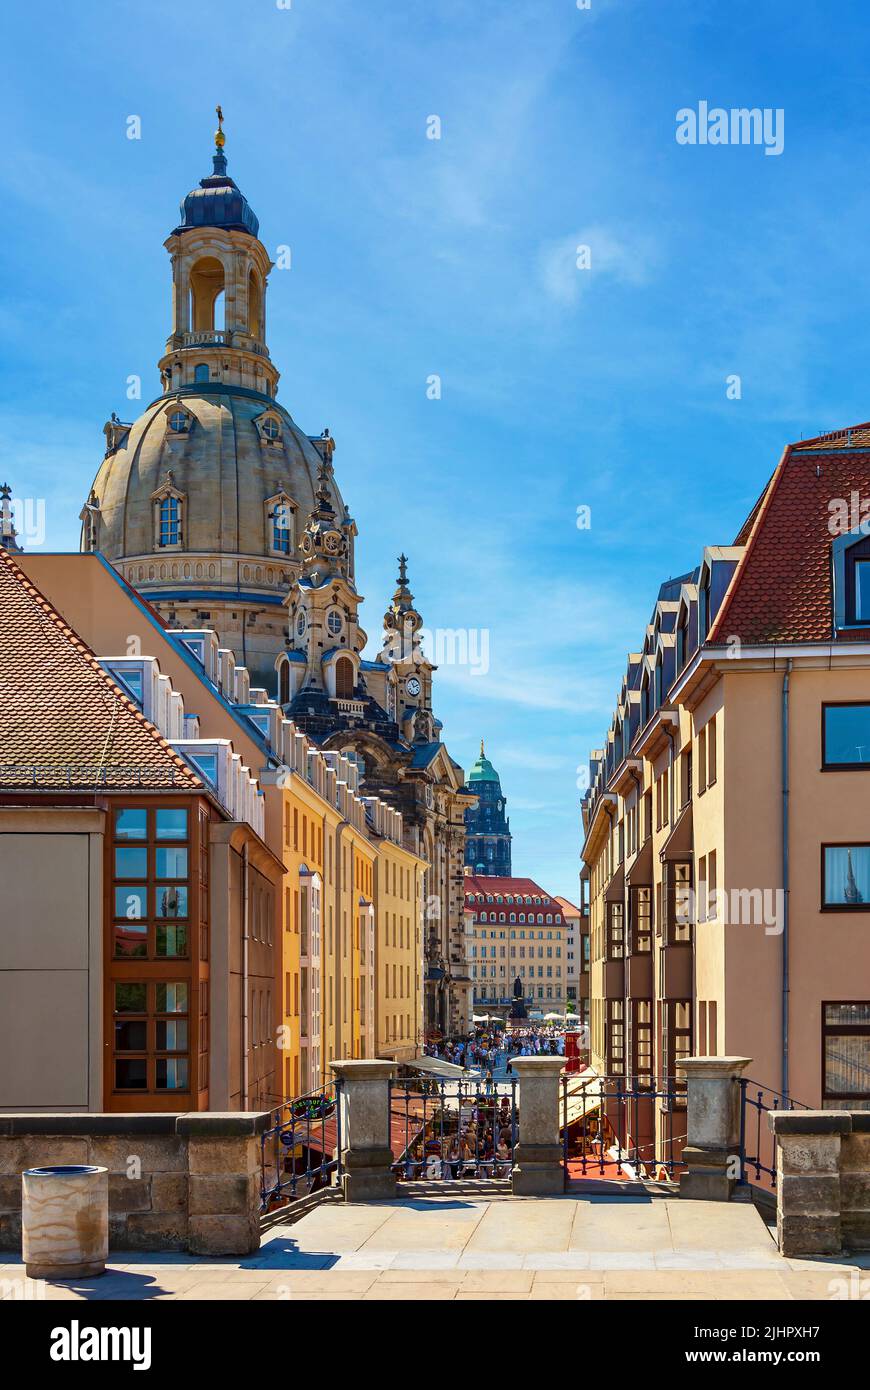 The world-famous Frauenkirche church in Dresden, Saxony, Germany, Europe. Stock Photo